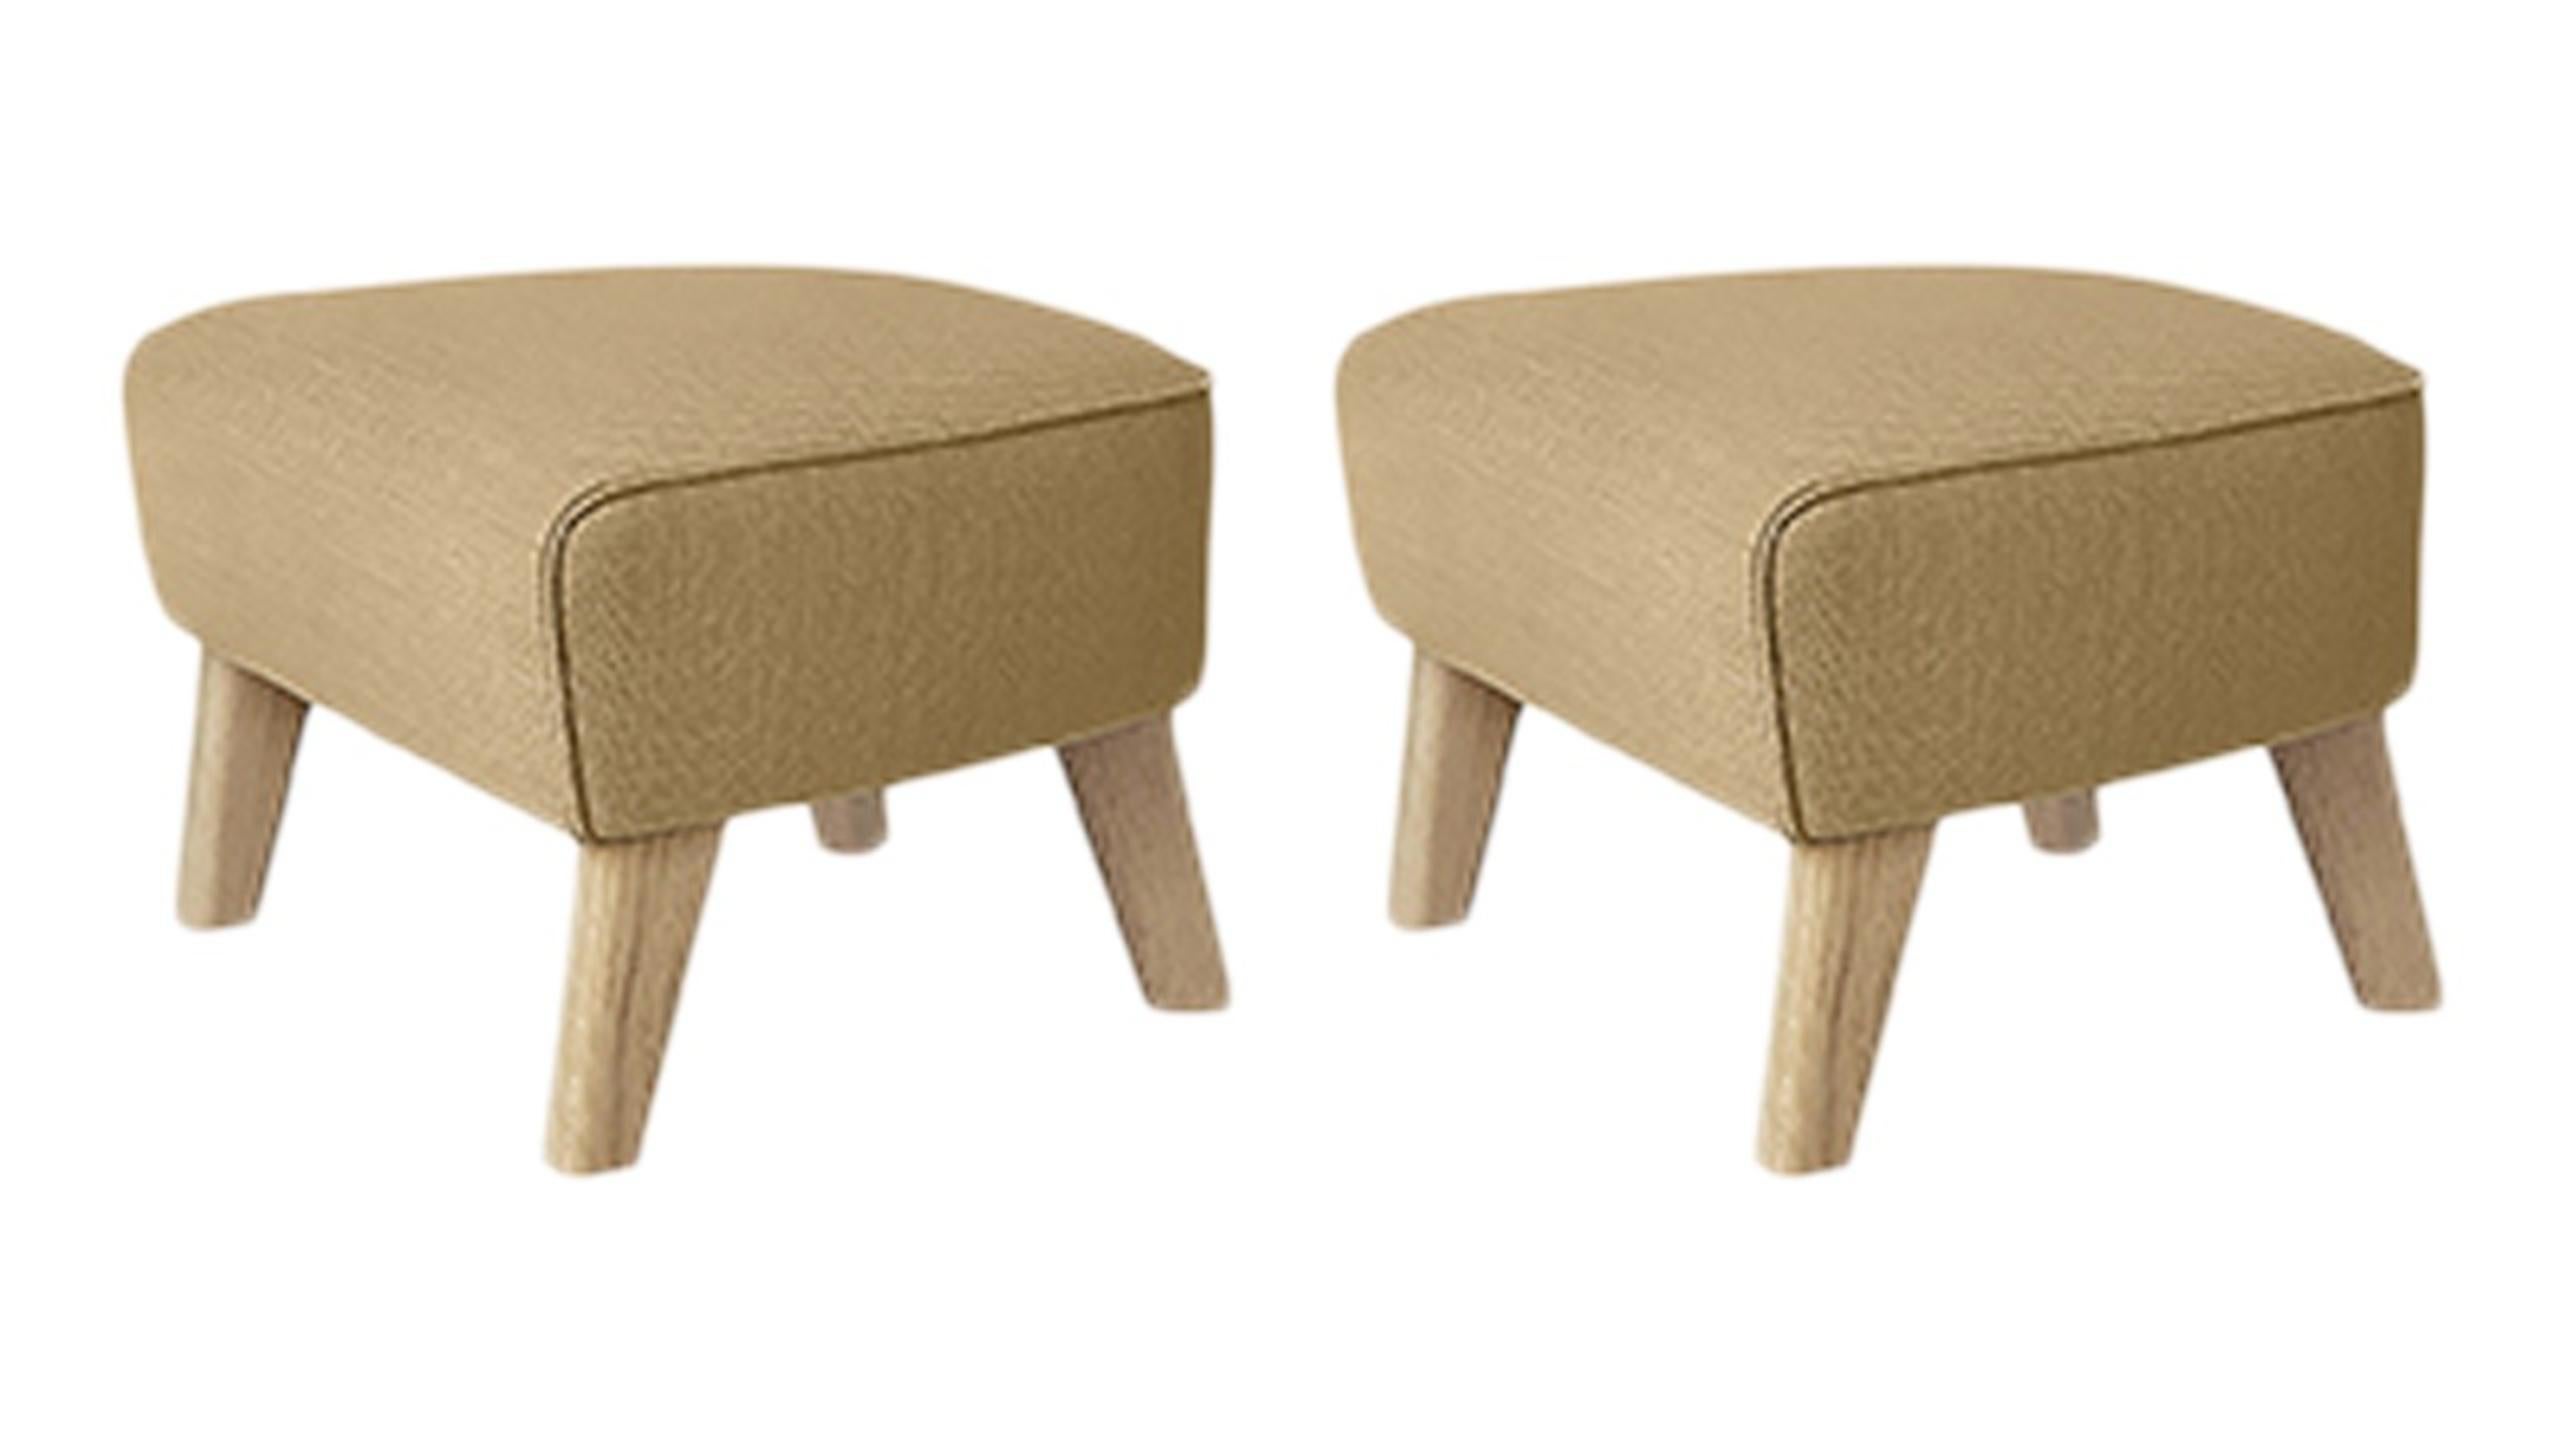 Set of 2 sand, natural Oak Raf Simons Vidar 3 My Own Chair footstool by Lassen
Dimensions: W 56 x D 58 x H 40 cm 
Materials: Textile
Also Available: Other colors available.

The My Own Chair footstool has been designed in the same spirit as